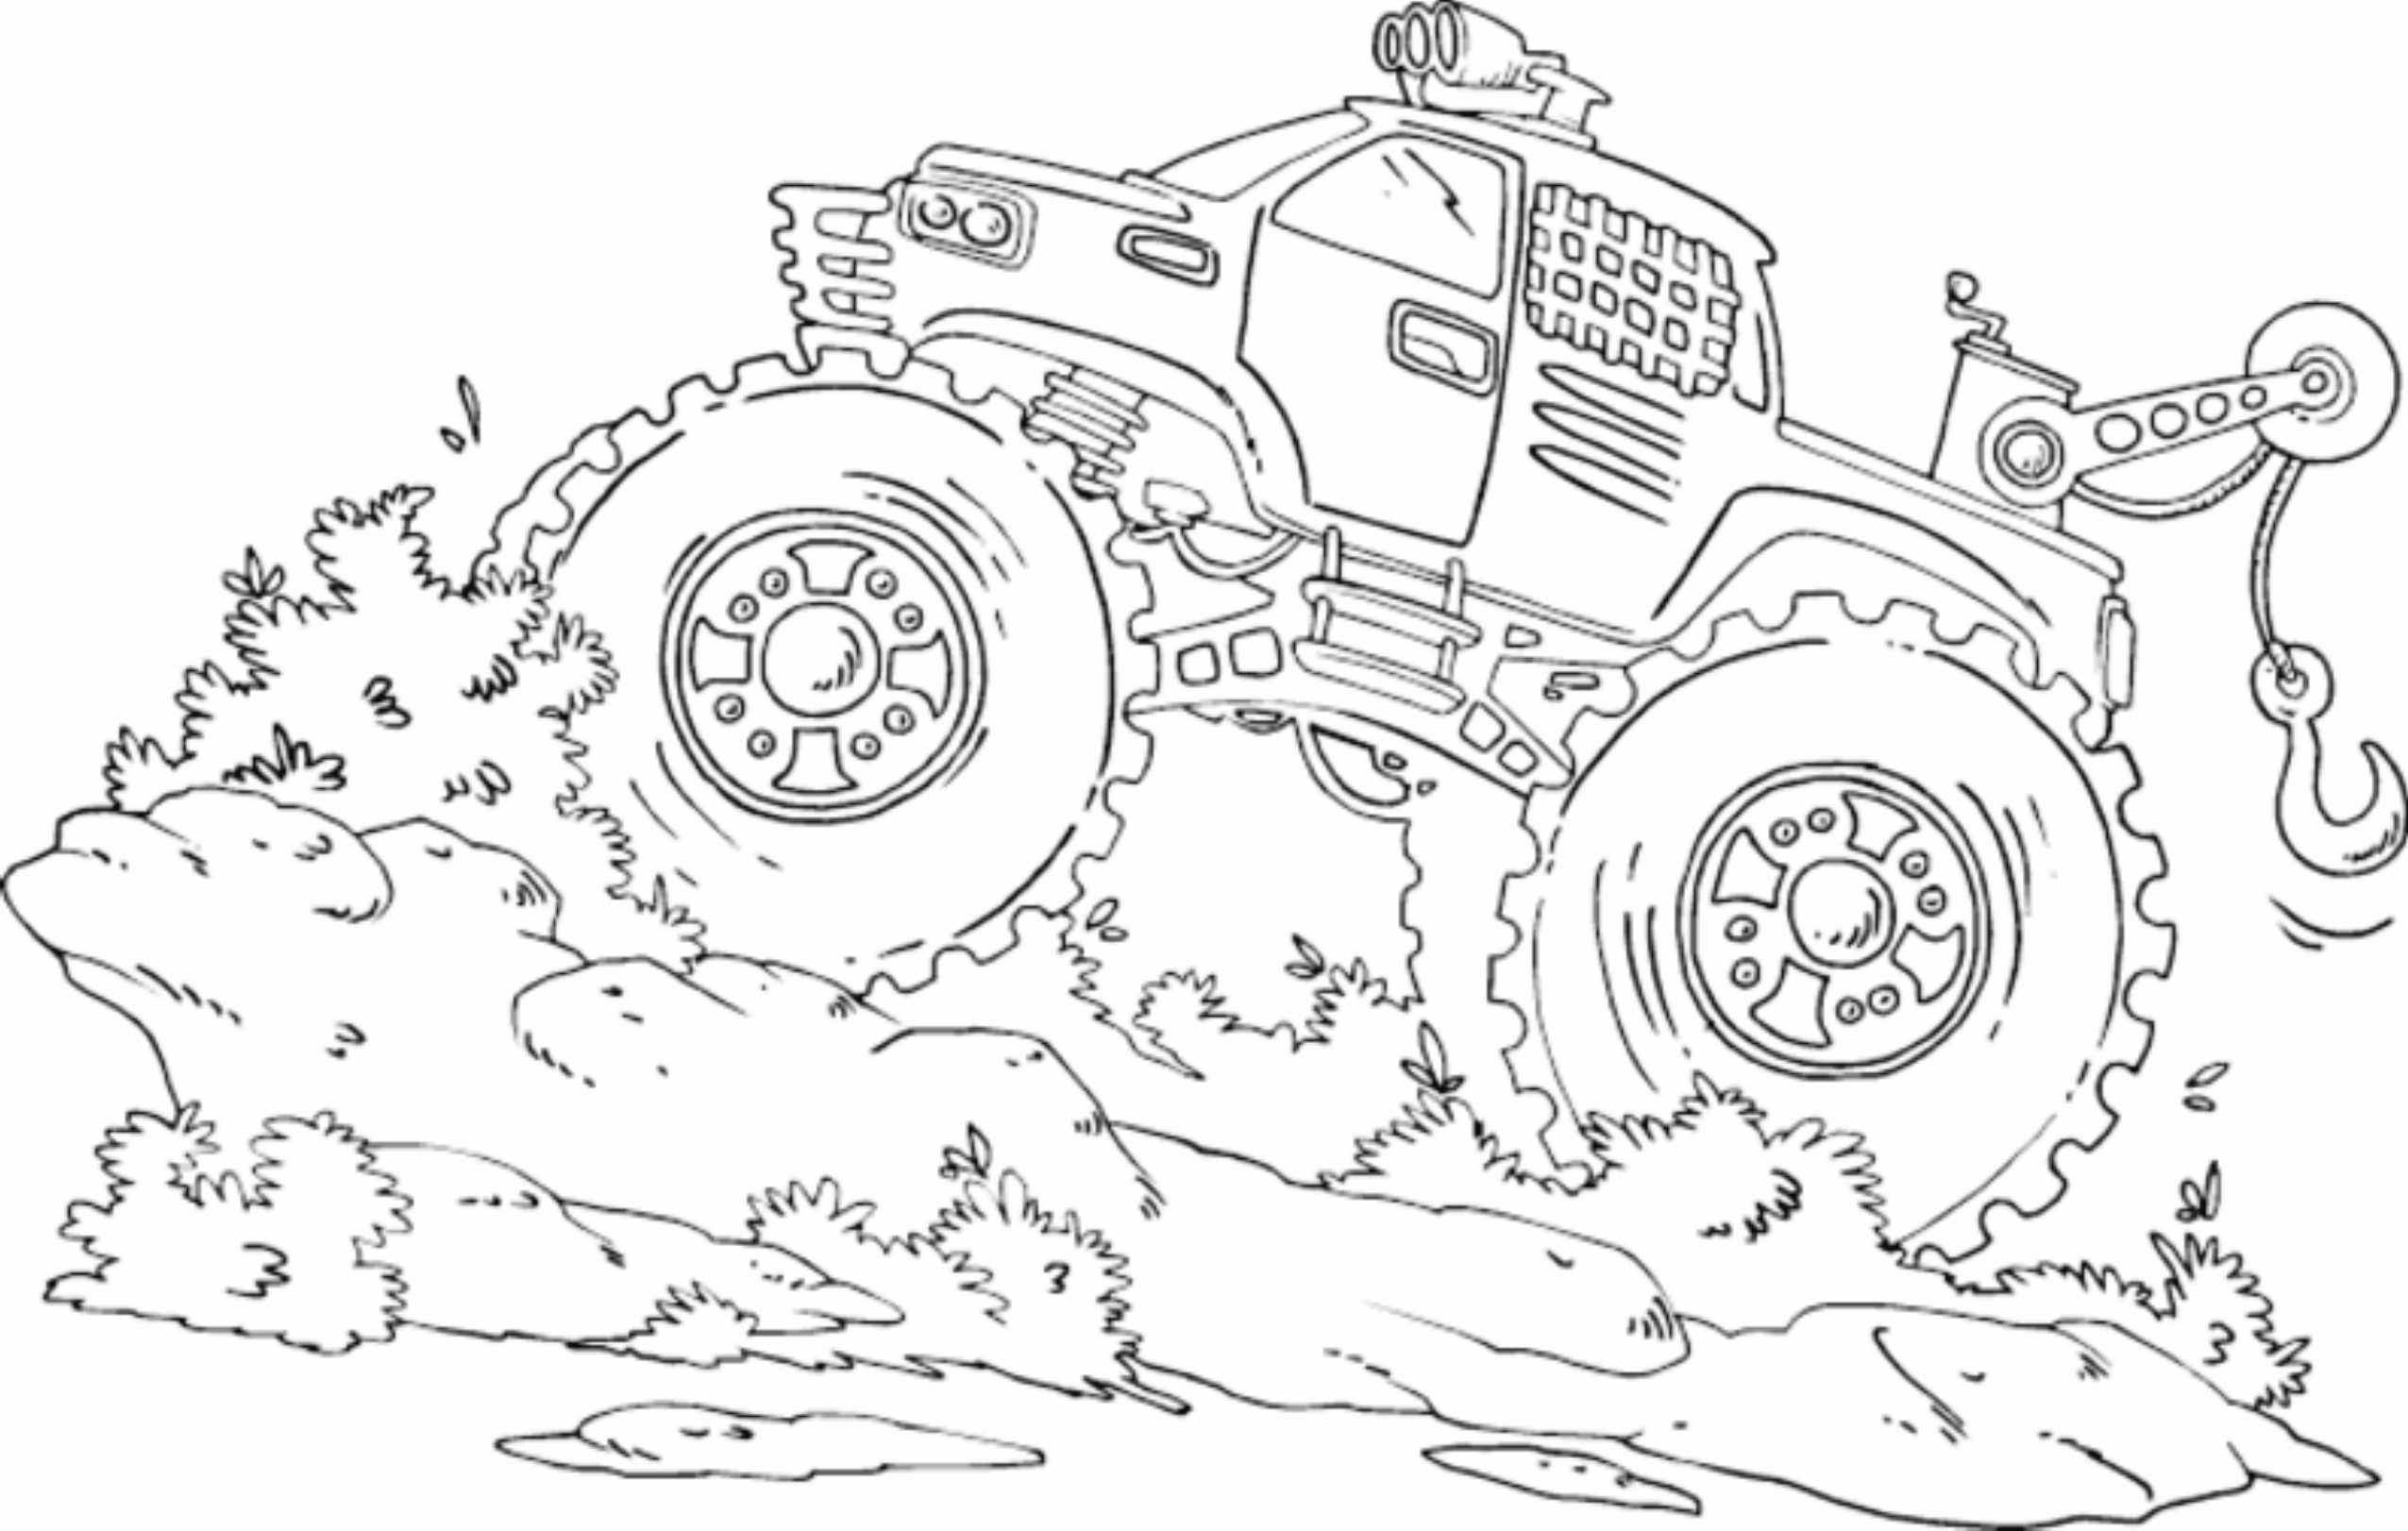 115 Cartoon Monster Truck Coloring Pages To Print with disney character